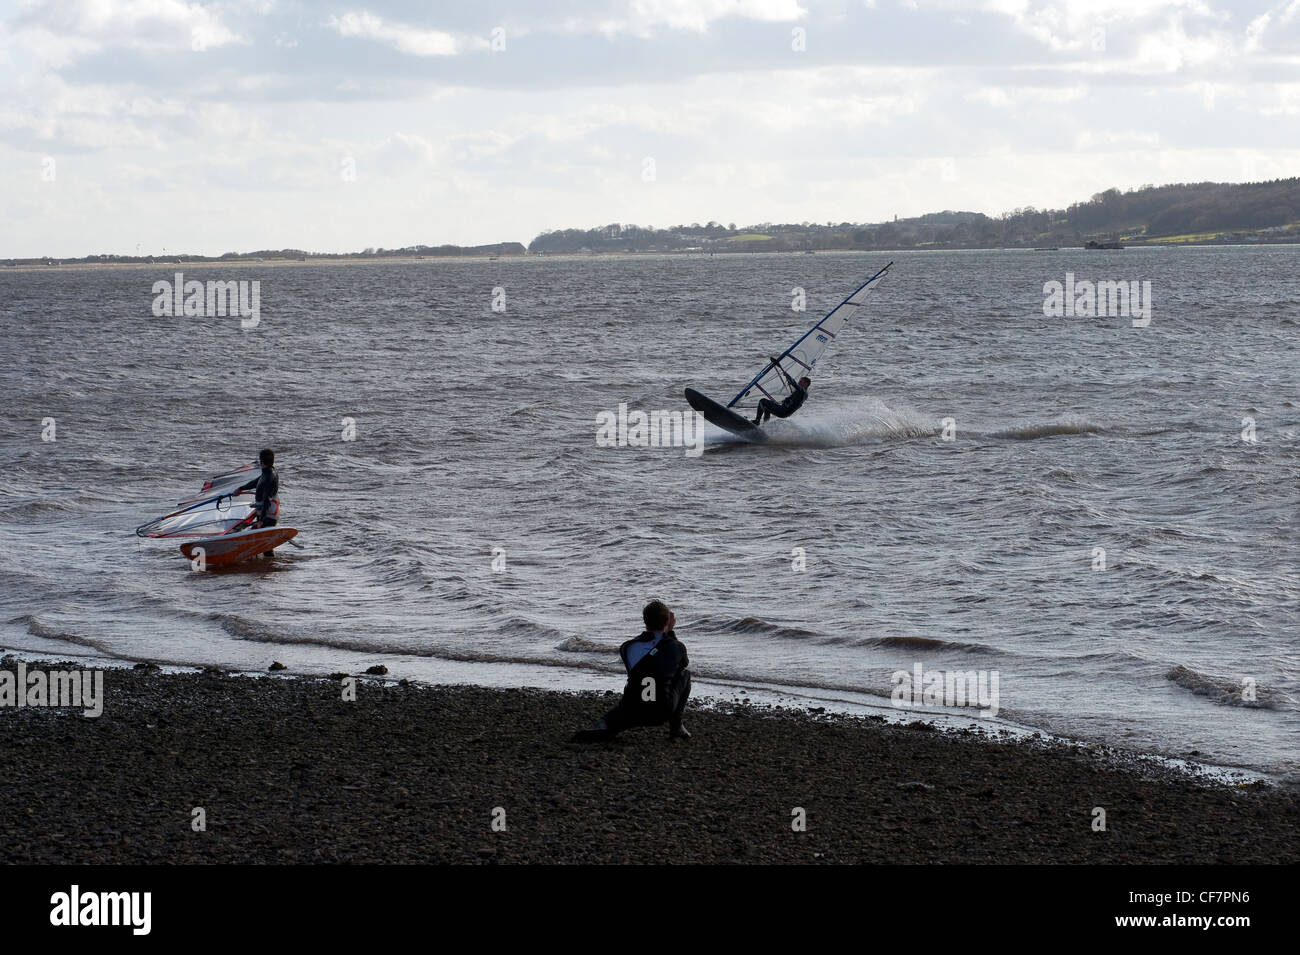 windsurfing on river exe, active, activity, adrenalin, adult, anonymous, blue, board, boardsailing, carving, fast, fun, gibe, Stock Photo